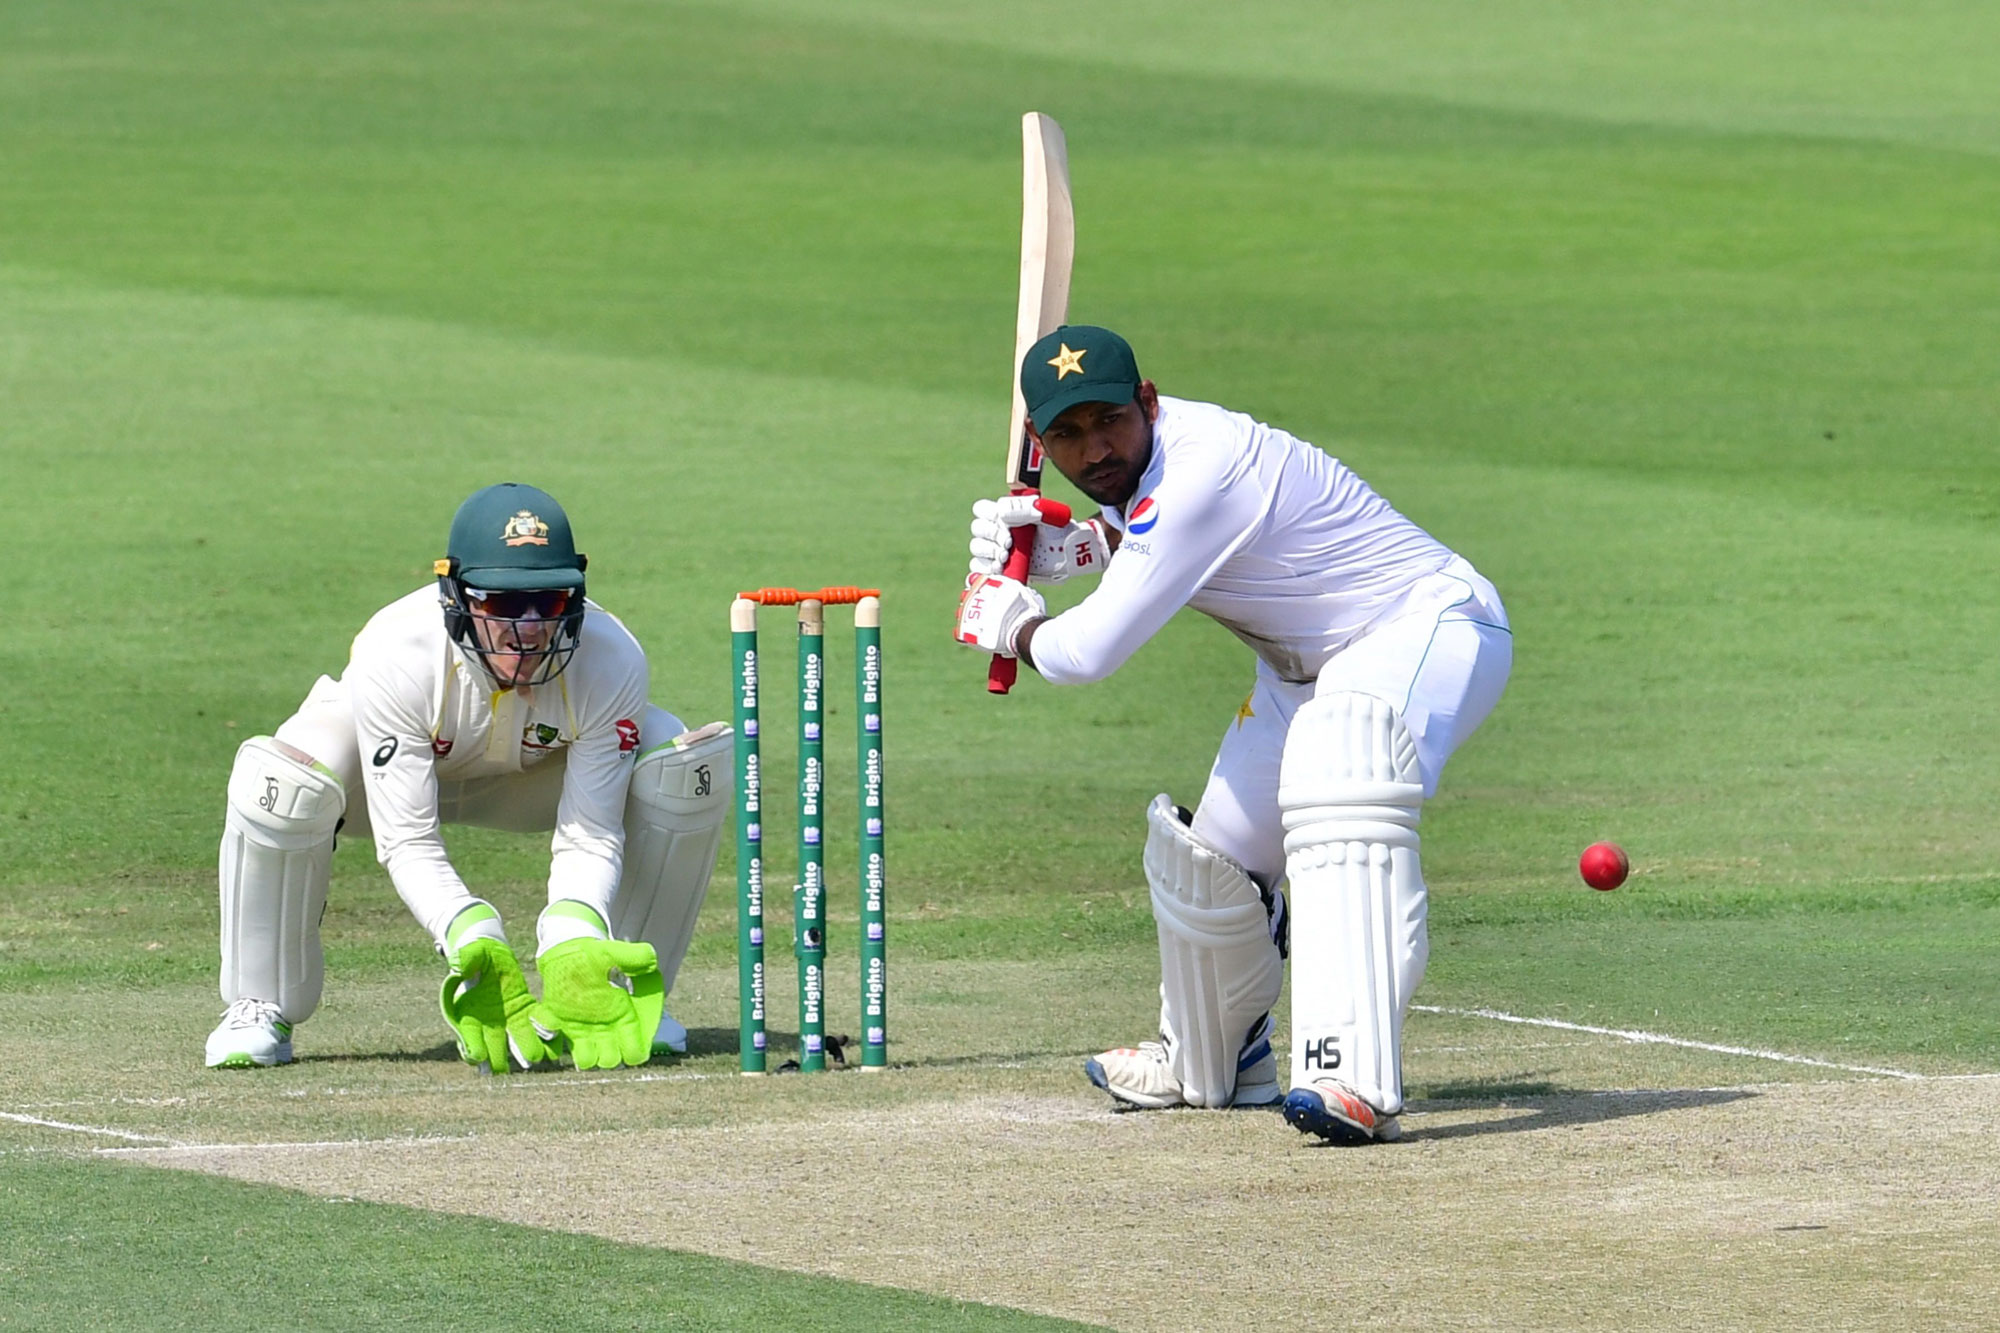 Pakistani cricketer Ahmed Sarfraz plays a shot during day one of the second Test cricket match in the series between Australia and Pakistan at the Abu Dhabi Cricket Stadium in Abu Dhabi on October 16, 2018. (Photo by GIUSEPPE CACACE / AFP)